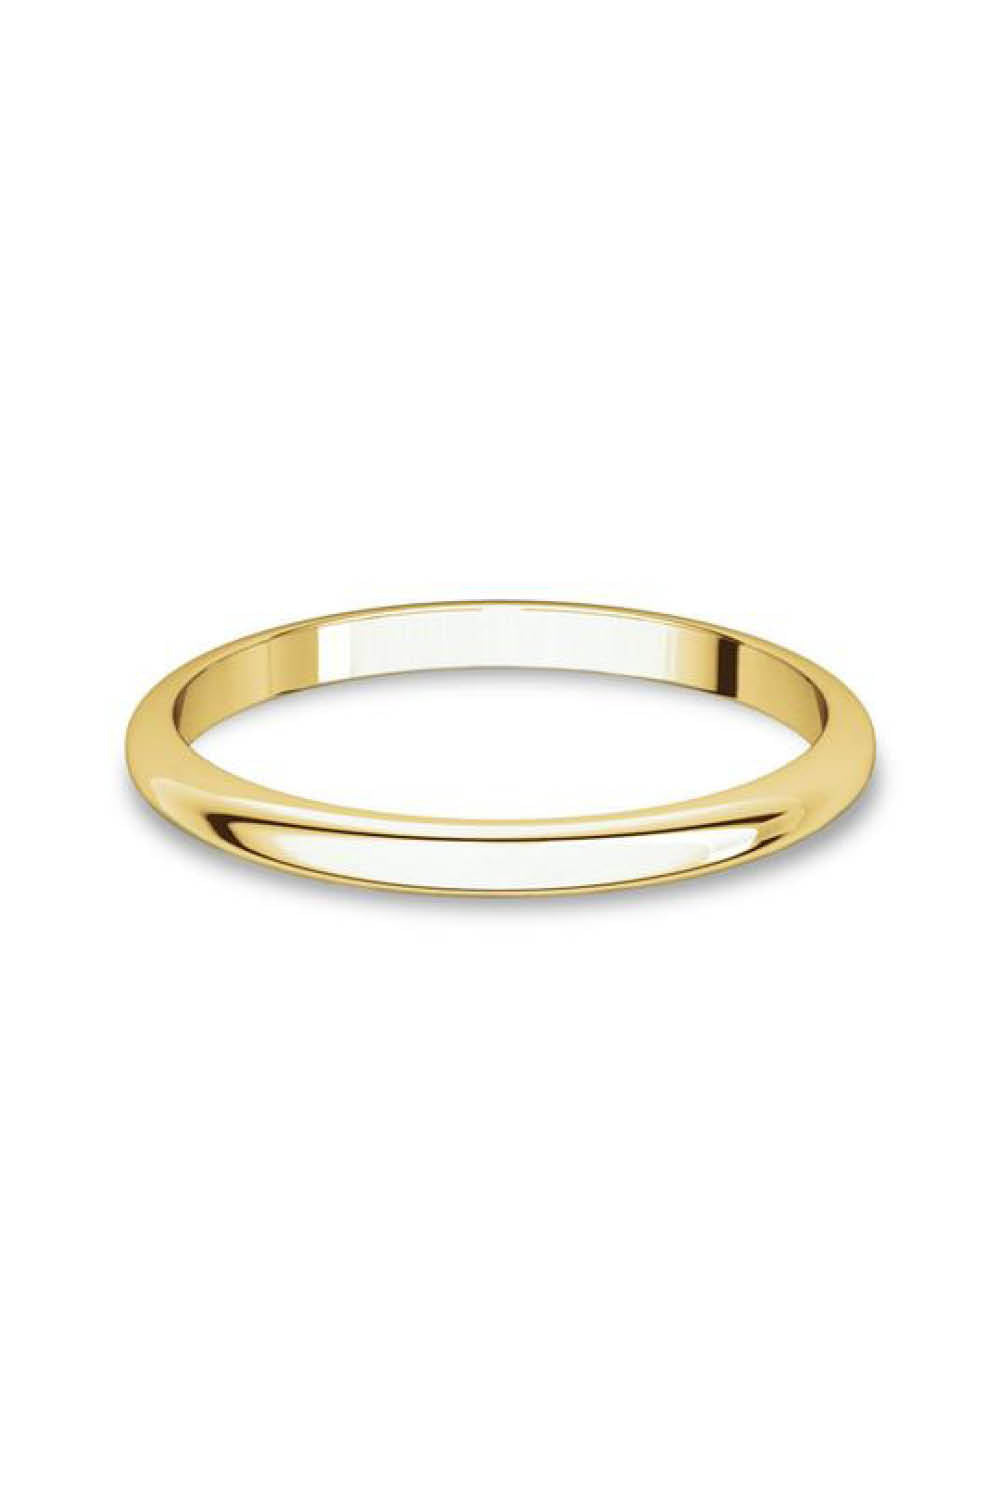 Reclaimed Classic Ring in Yellow Gold